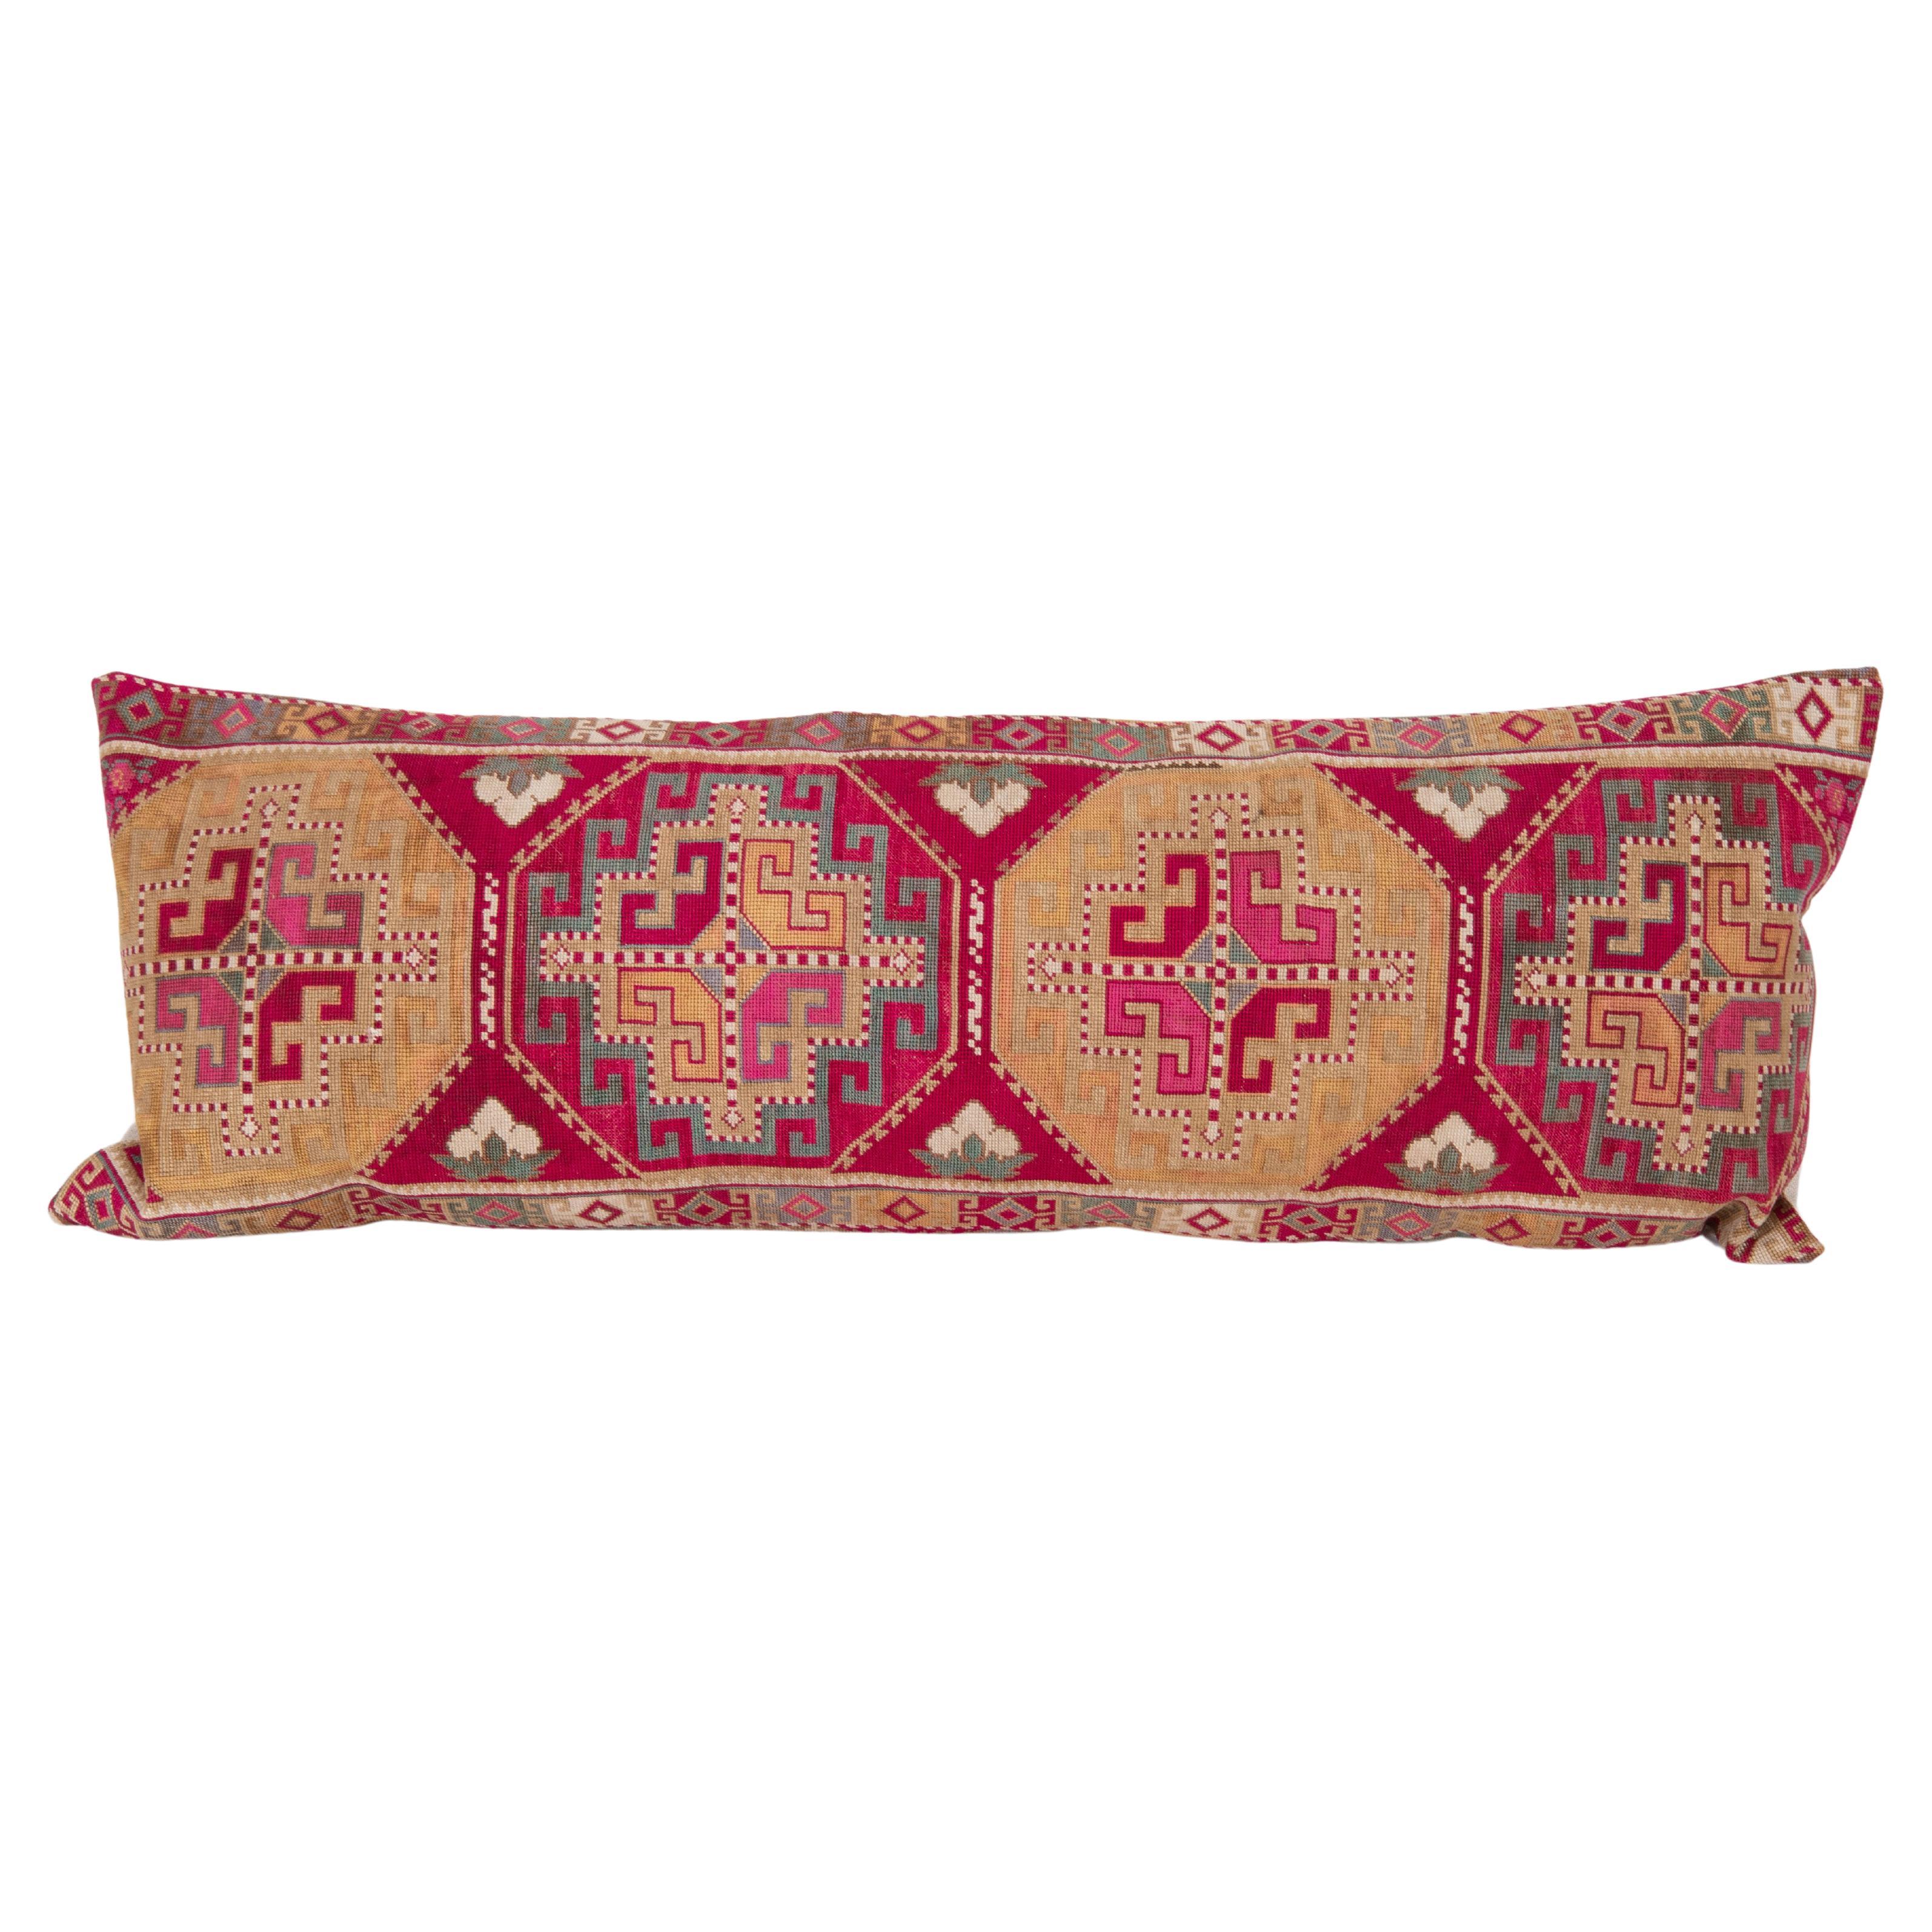 Pillow Cover, Made from a 1970s/80s silk mafrash ( storage bag ) Panel